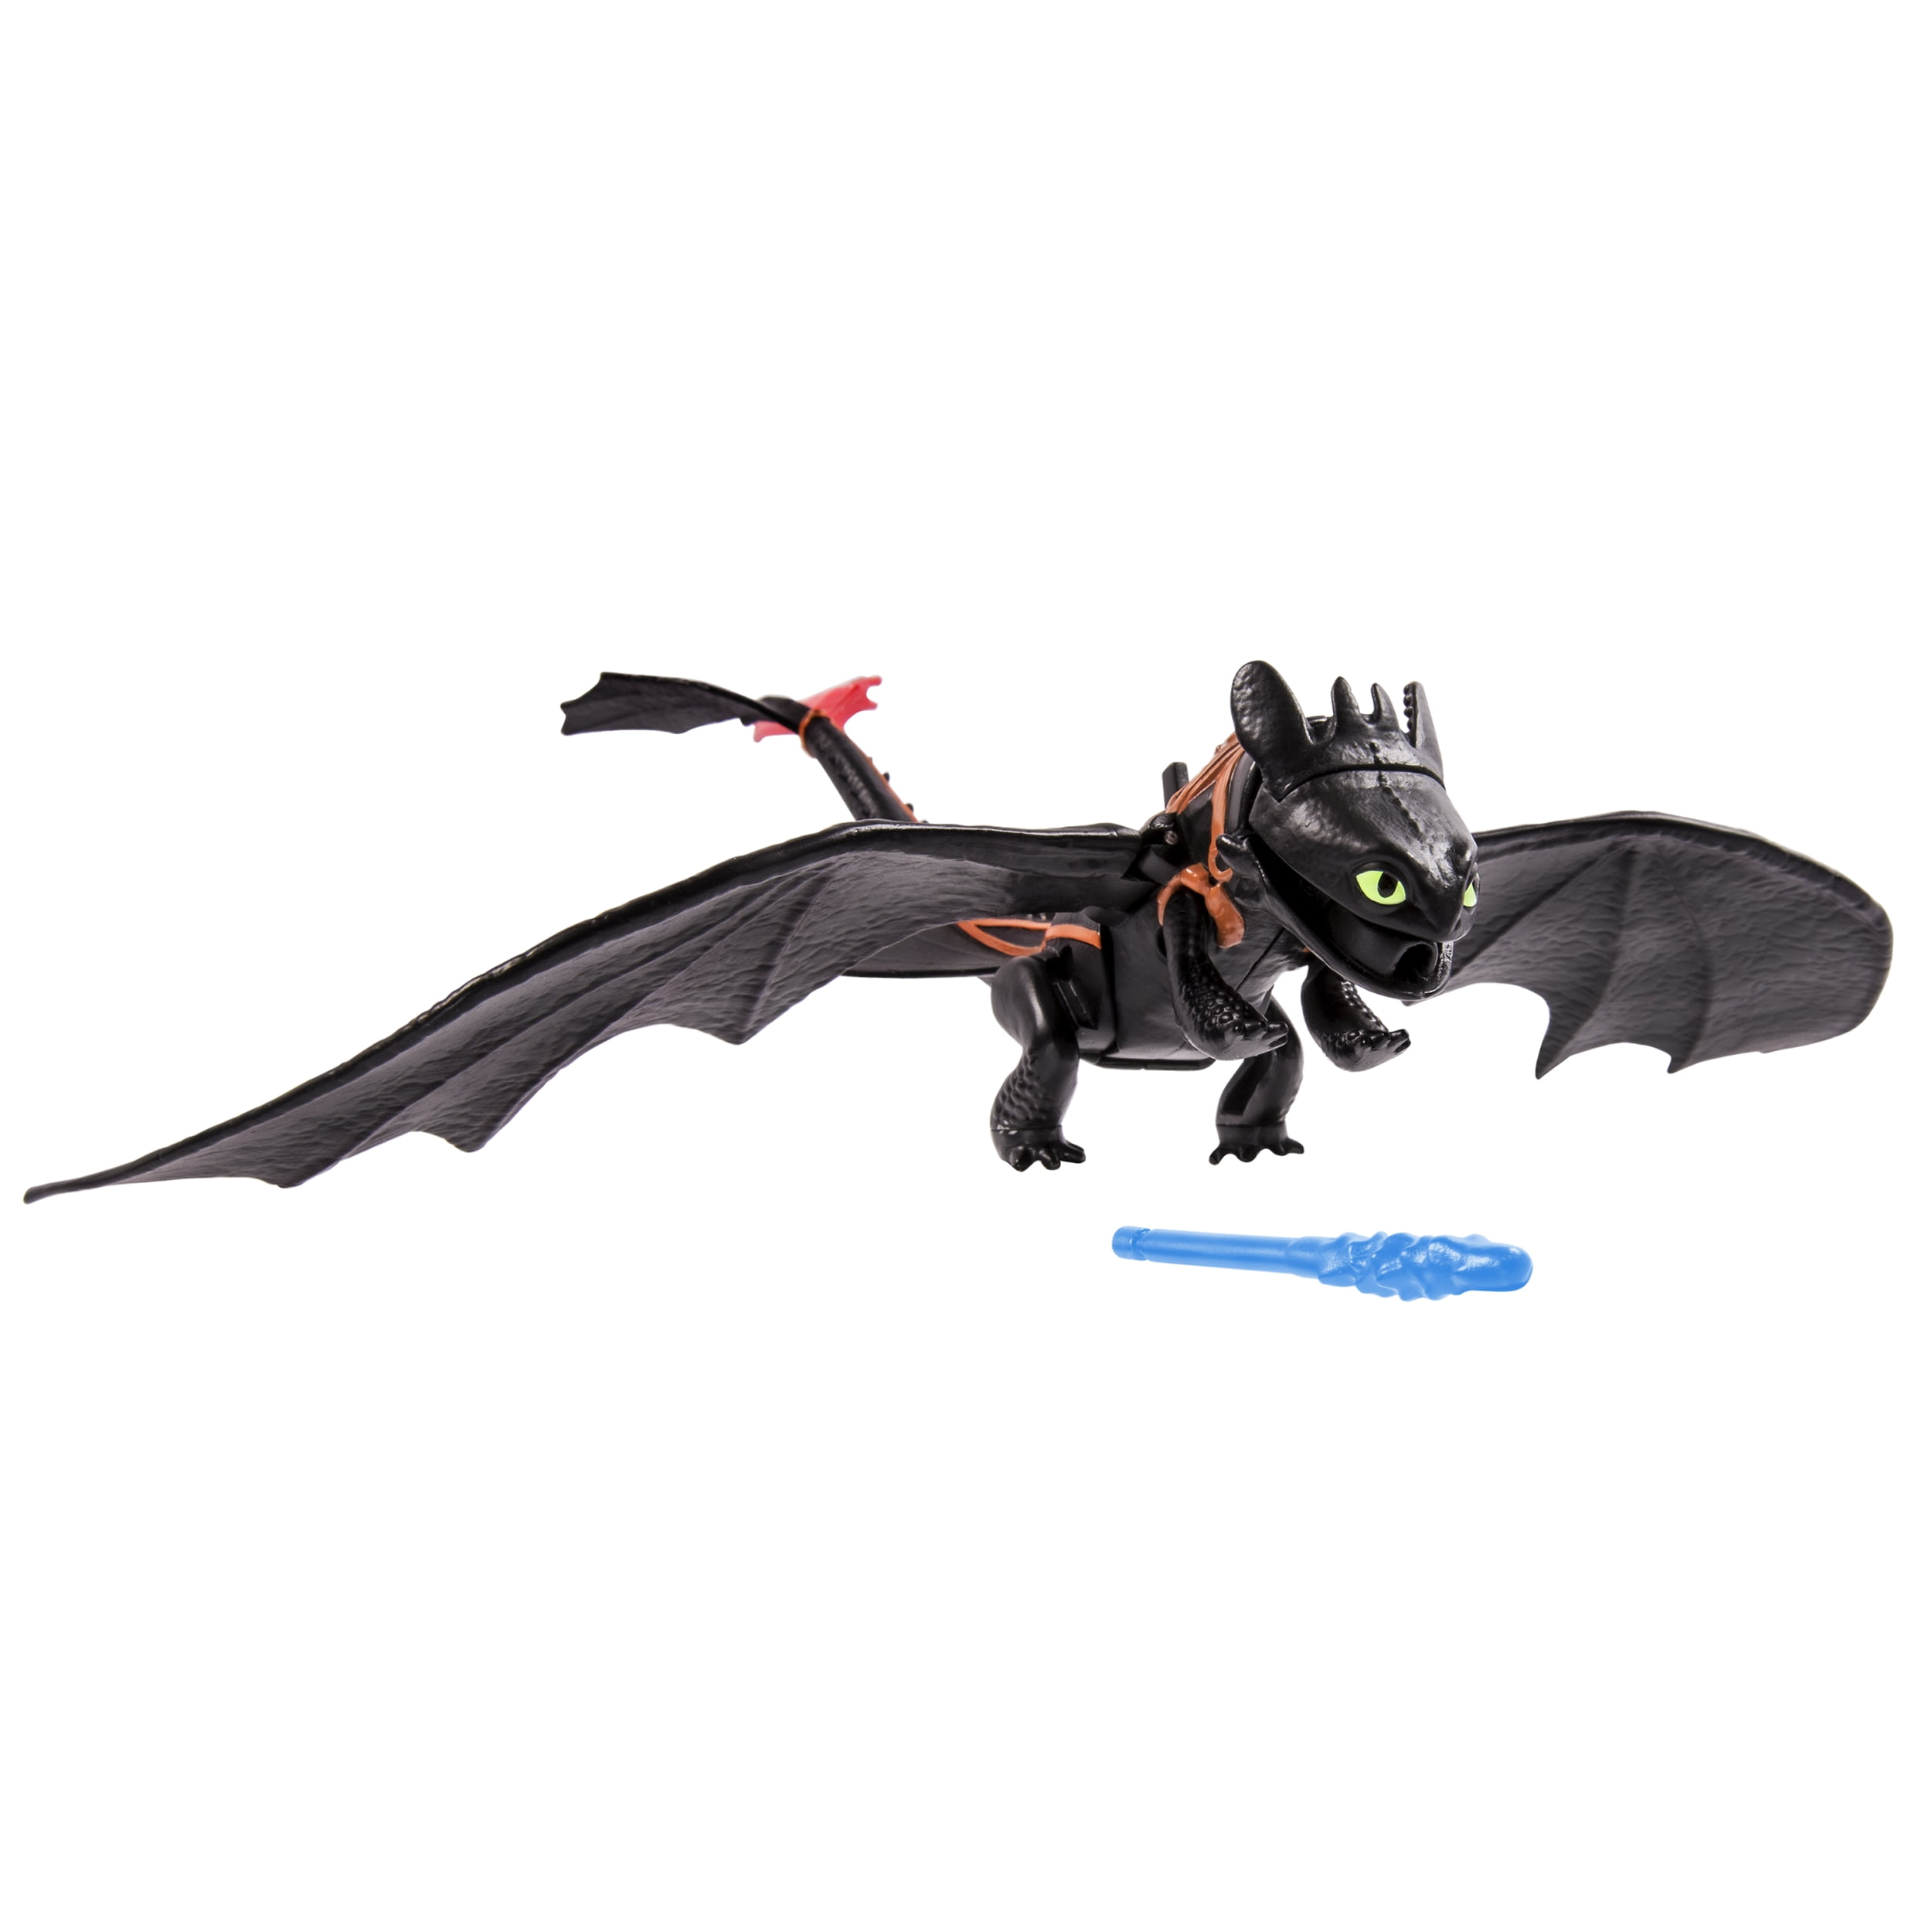 DreamWorks Dragons, Action Dragon Figure, Toothless